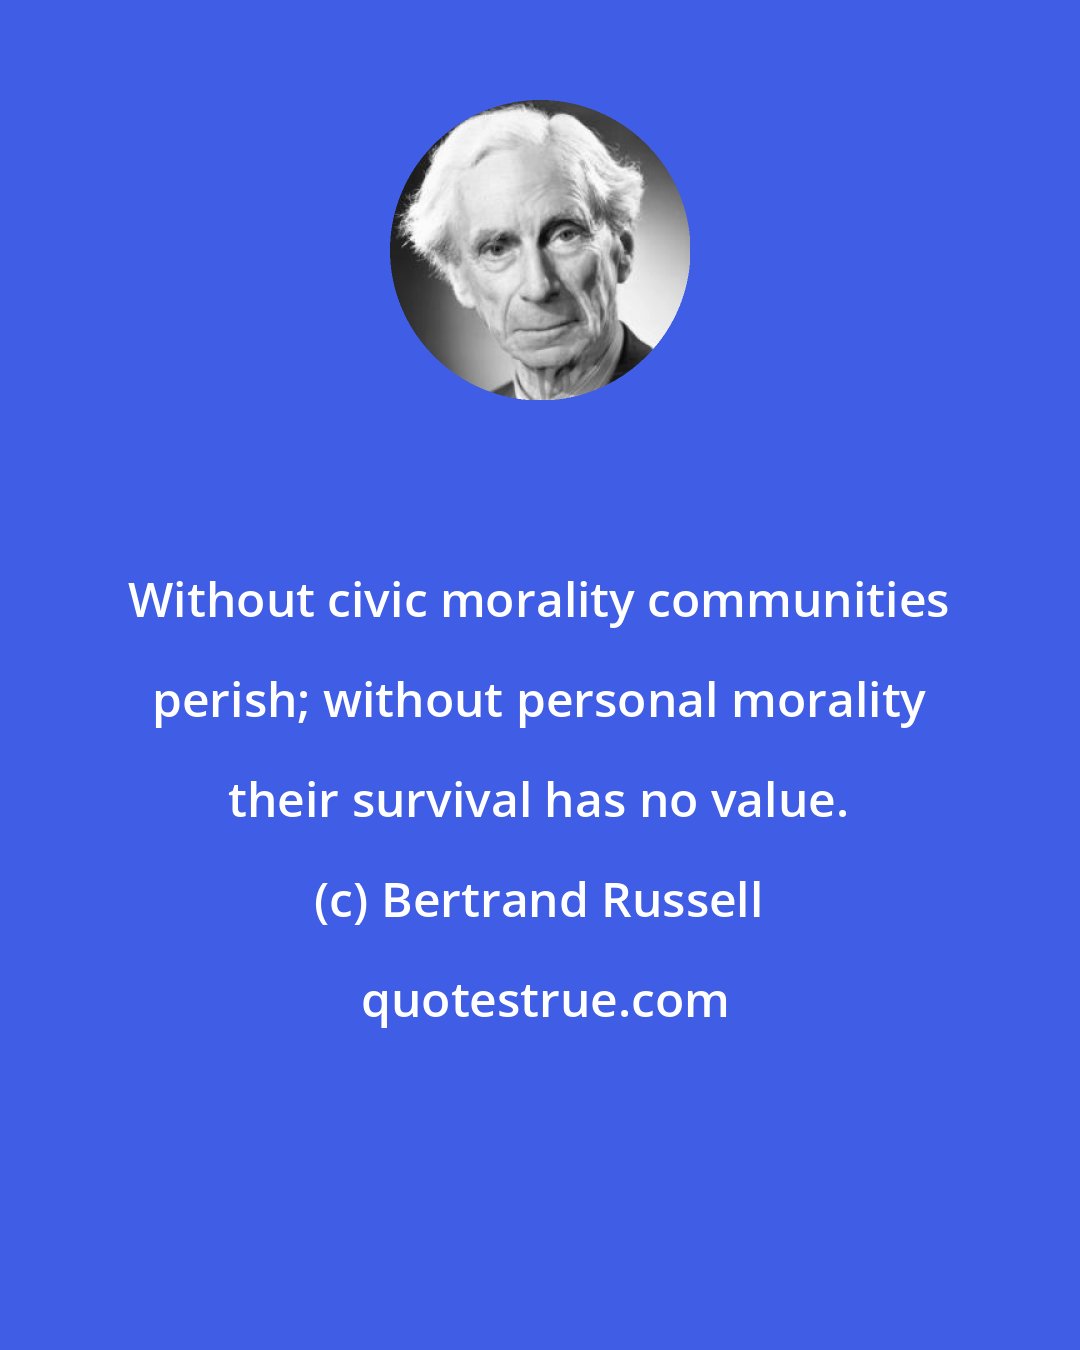 Bertrand Russell: Without civic morality communities perish; without personal morality their survival has no value.